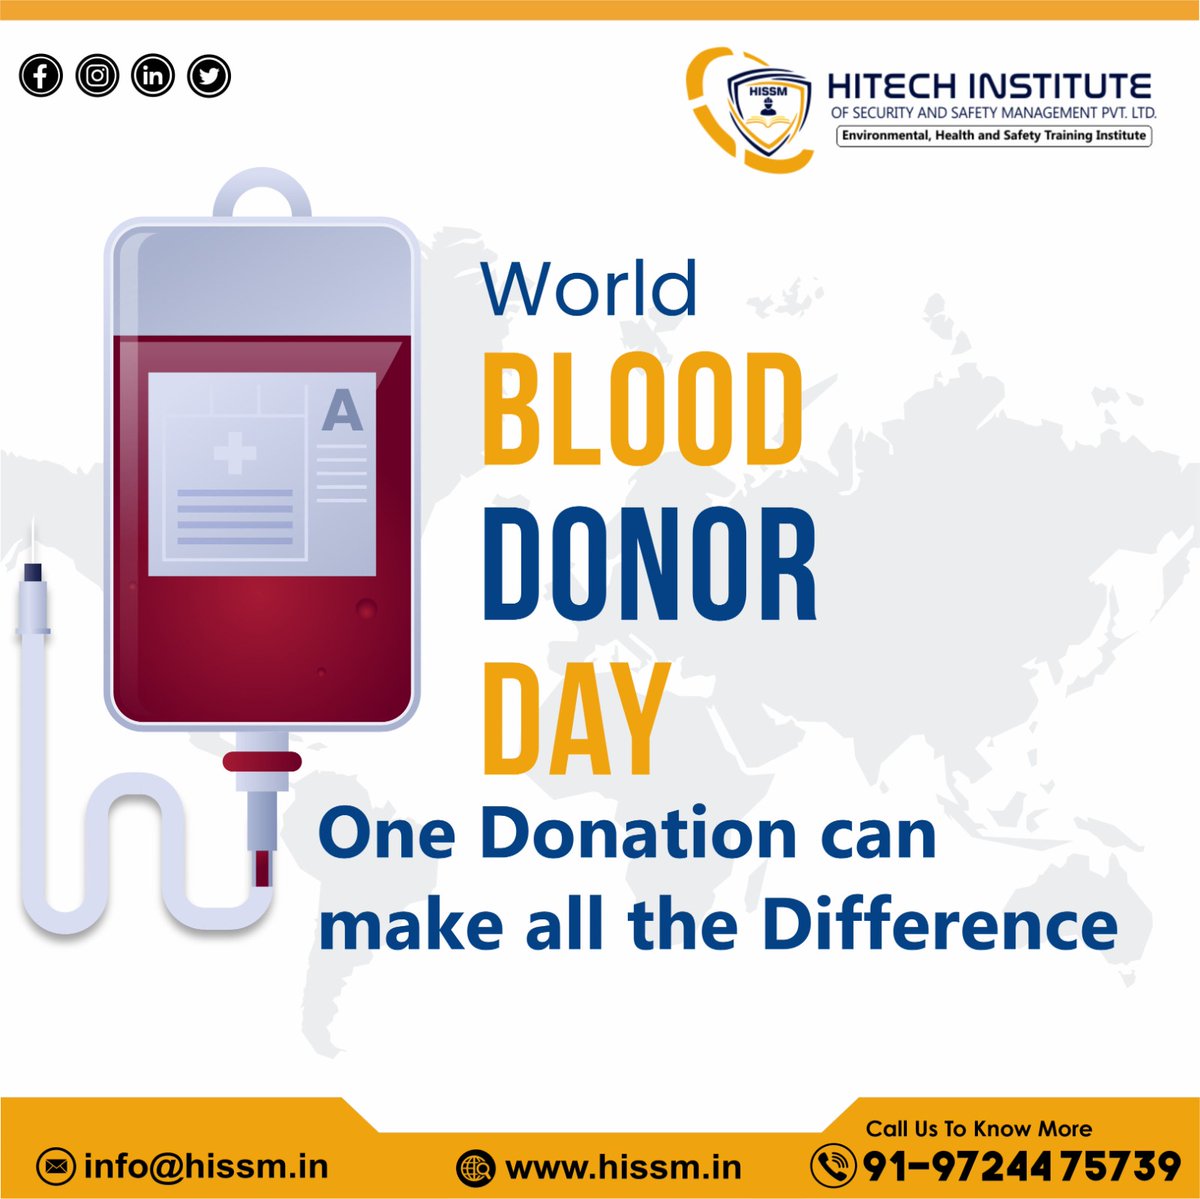 World Blood Donor Day

One Donation can make all the Difference 

𝐇𝐢𝐭𝐞𝐜𝐡 𝐈𝐧𝐬𝐭𝐢𝐭𝐮𝐭𝐞 𝐨𝐟 𝐒𝐞𝐜𝐮𝐫𝐢𝐭𝐲 & 𝐒𝐚𝐟𝐞𝐭𝐲 𝐌𝐚𝐧𝐚𝐠𝐞𝐦𝐞𝐧𝐭 𝐏𝐯𝐭 𝐋𝐭𝐝
for more details contact us :- + 91 9724475739
visit our website:- hissm.in